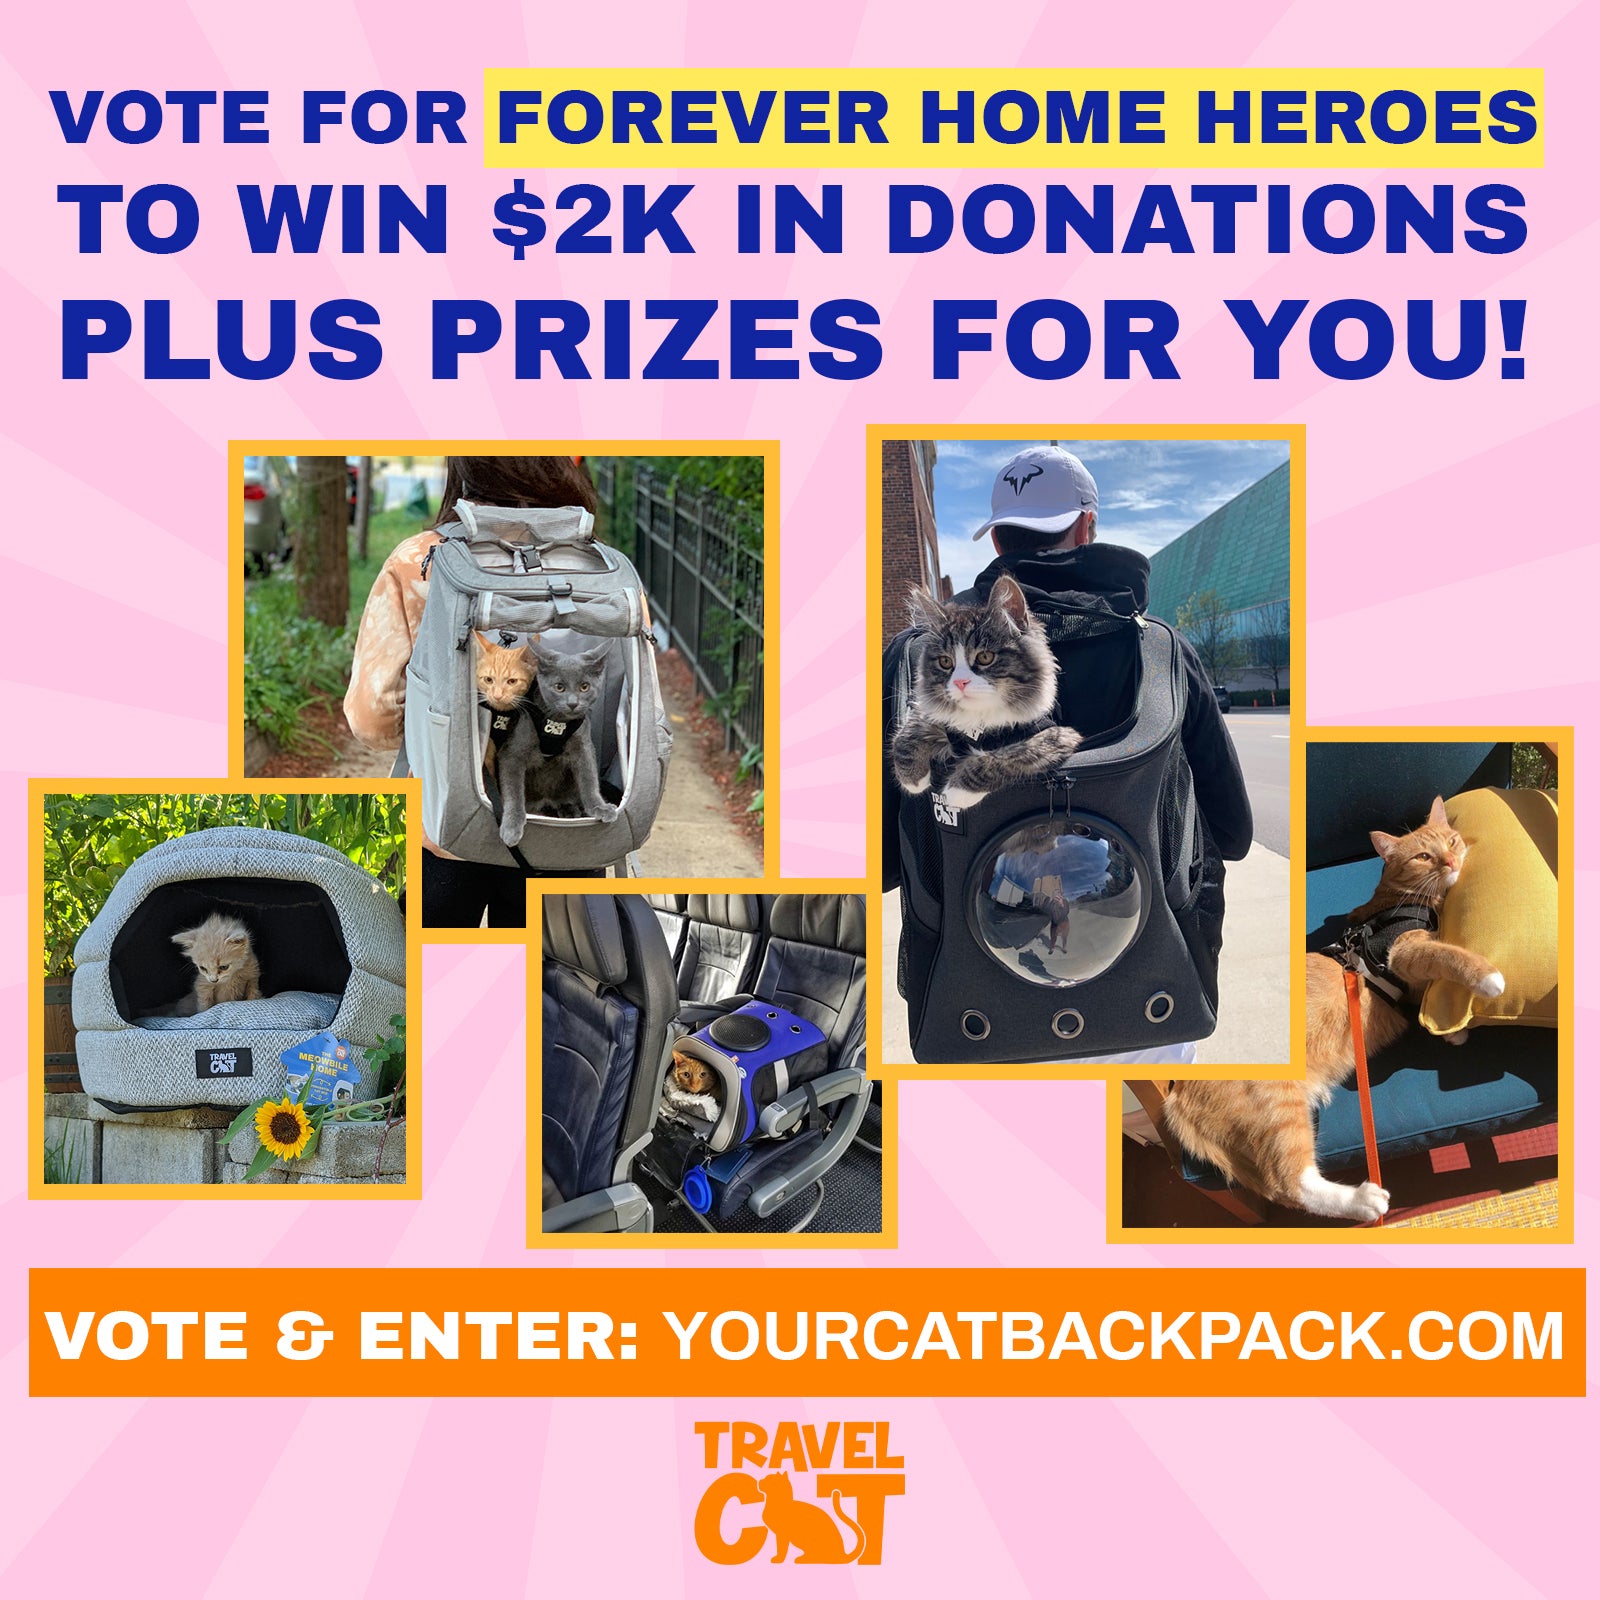 Nominate or Vote for a Forever Home Hero to Win $2k in Donations Plus Prizes for You!